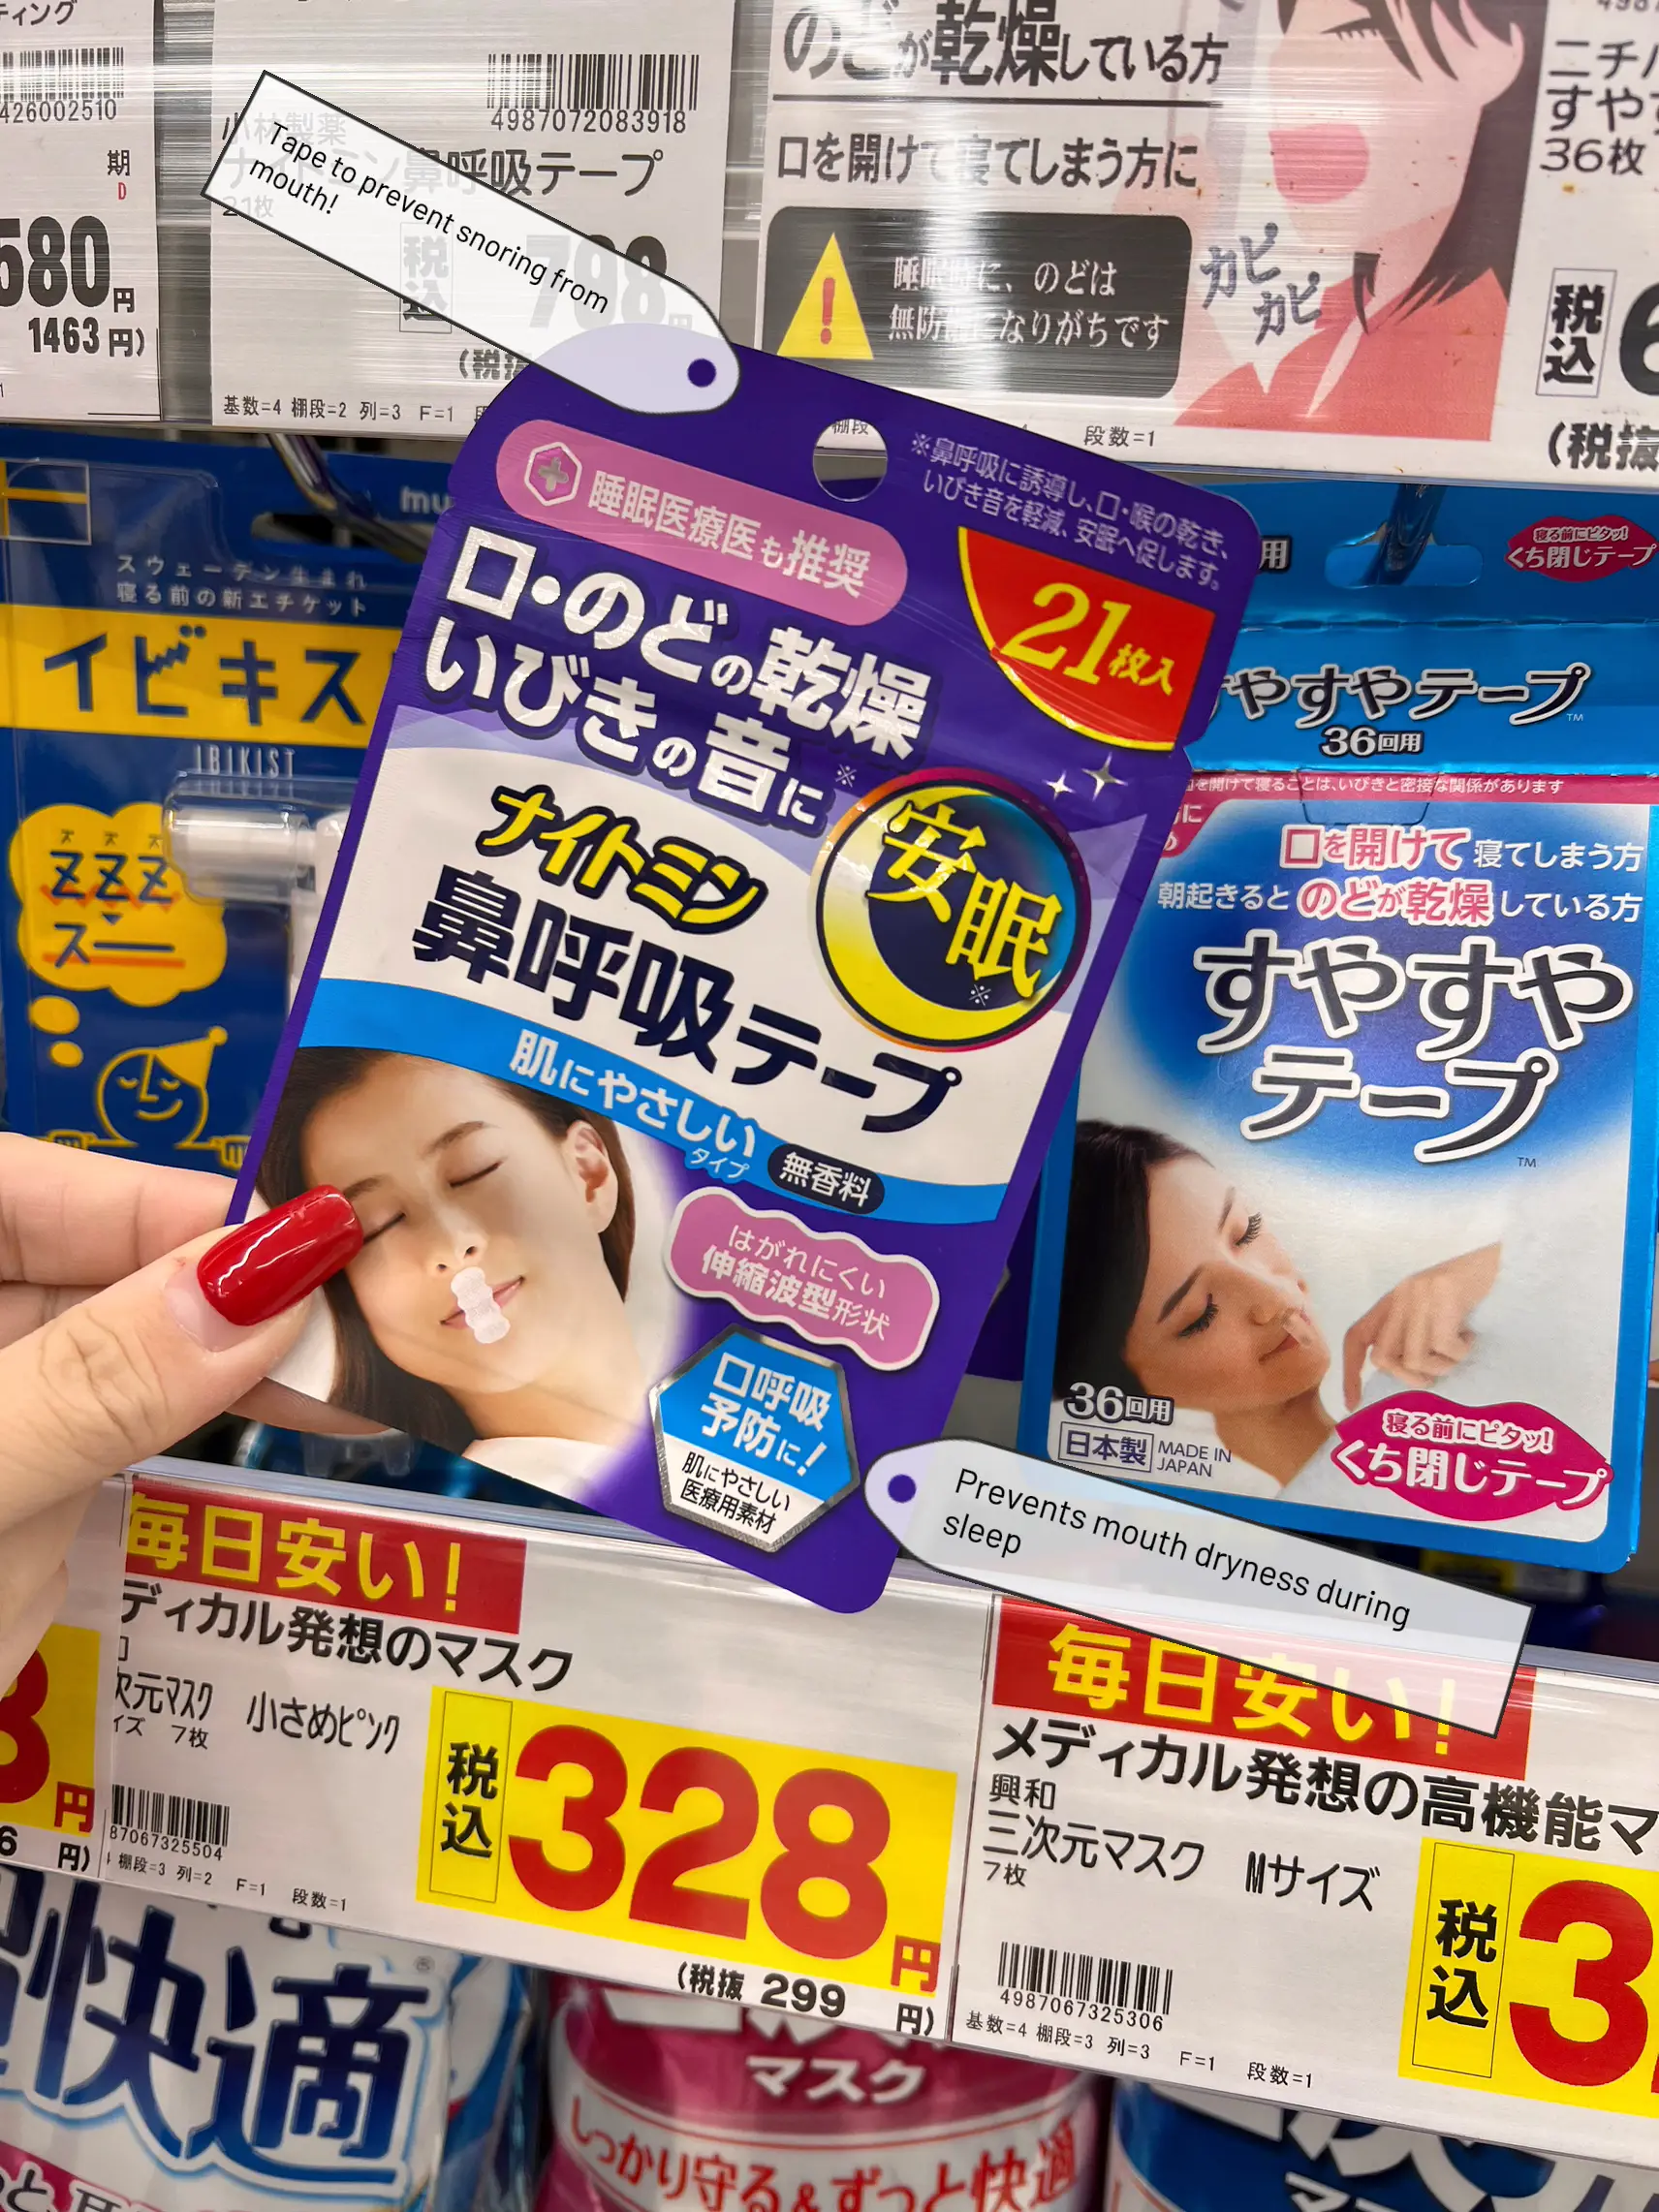 🇯🇵 MUST-BUYS AT A JAPAN’S DRUGSTORE? PT.2's images(4)